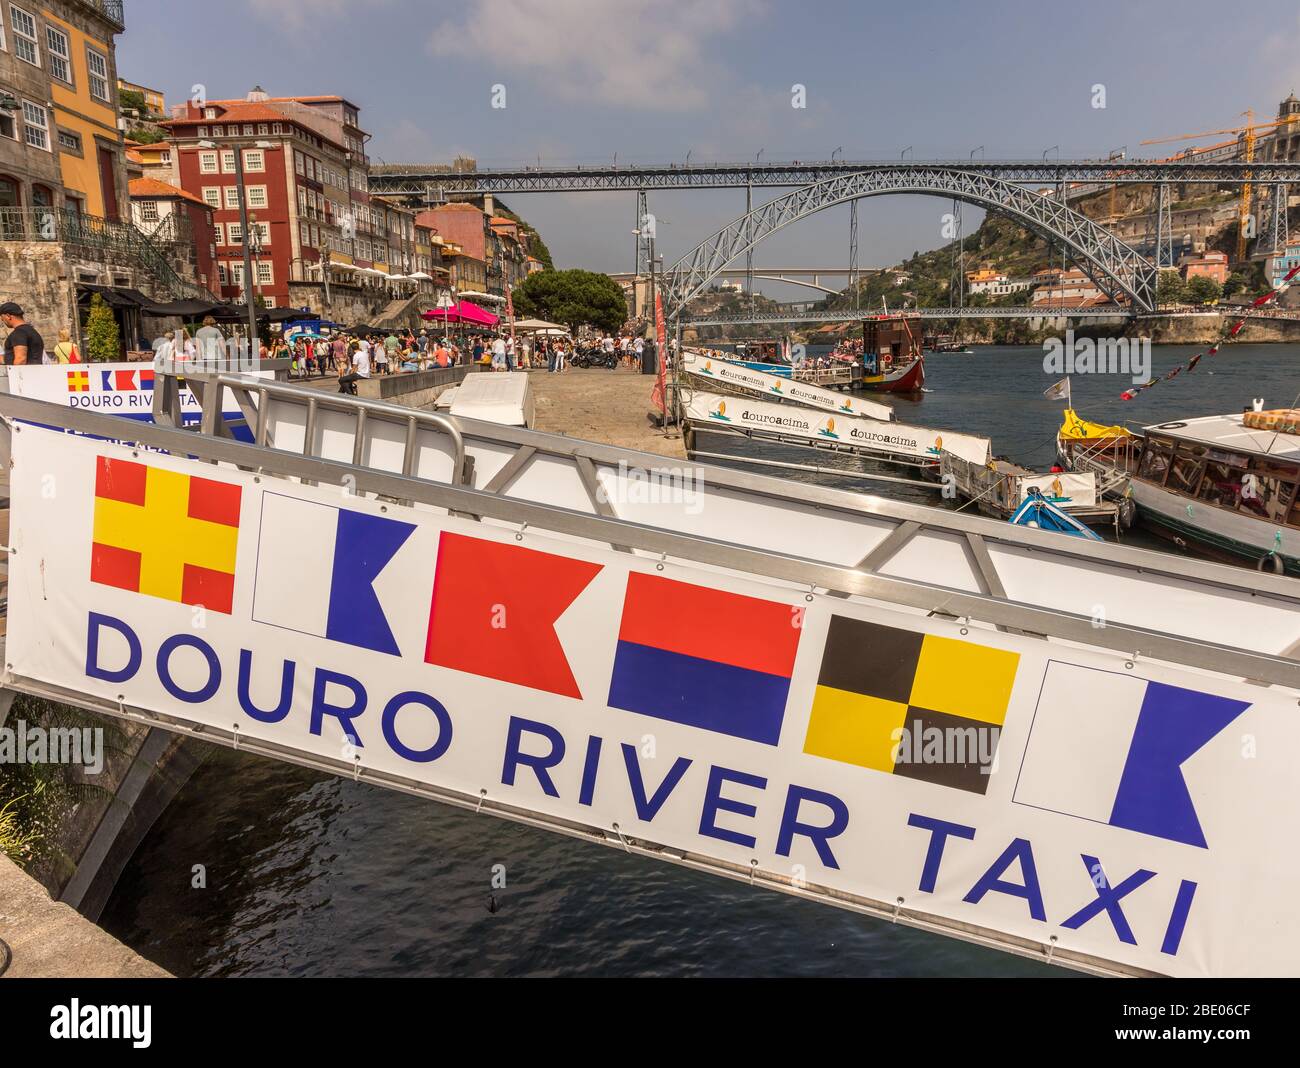 Douro River Taxi loading ramp and dock showing nautical flags RABELA (table), the river and bridge in Porto in background, Portugal Stock Photo